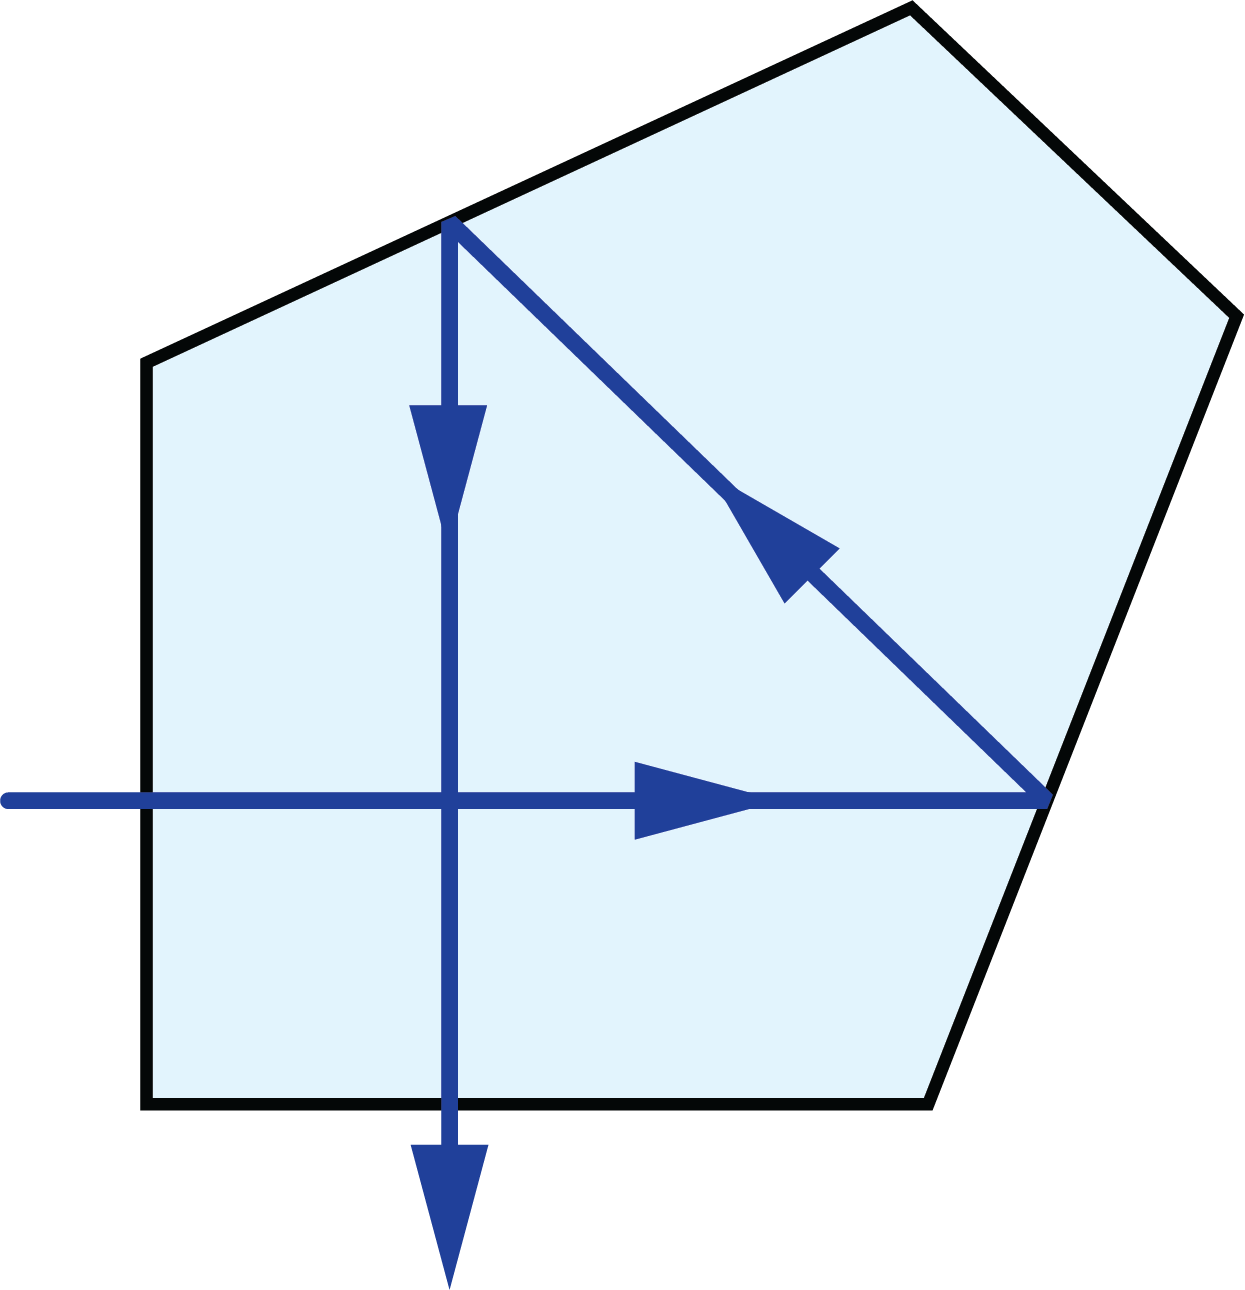 the typical ray-path diagram for a penta prism